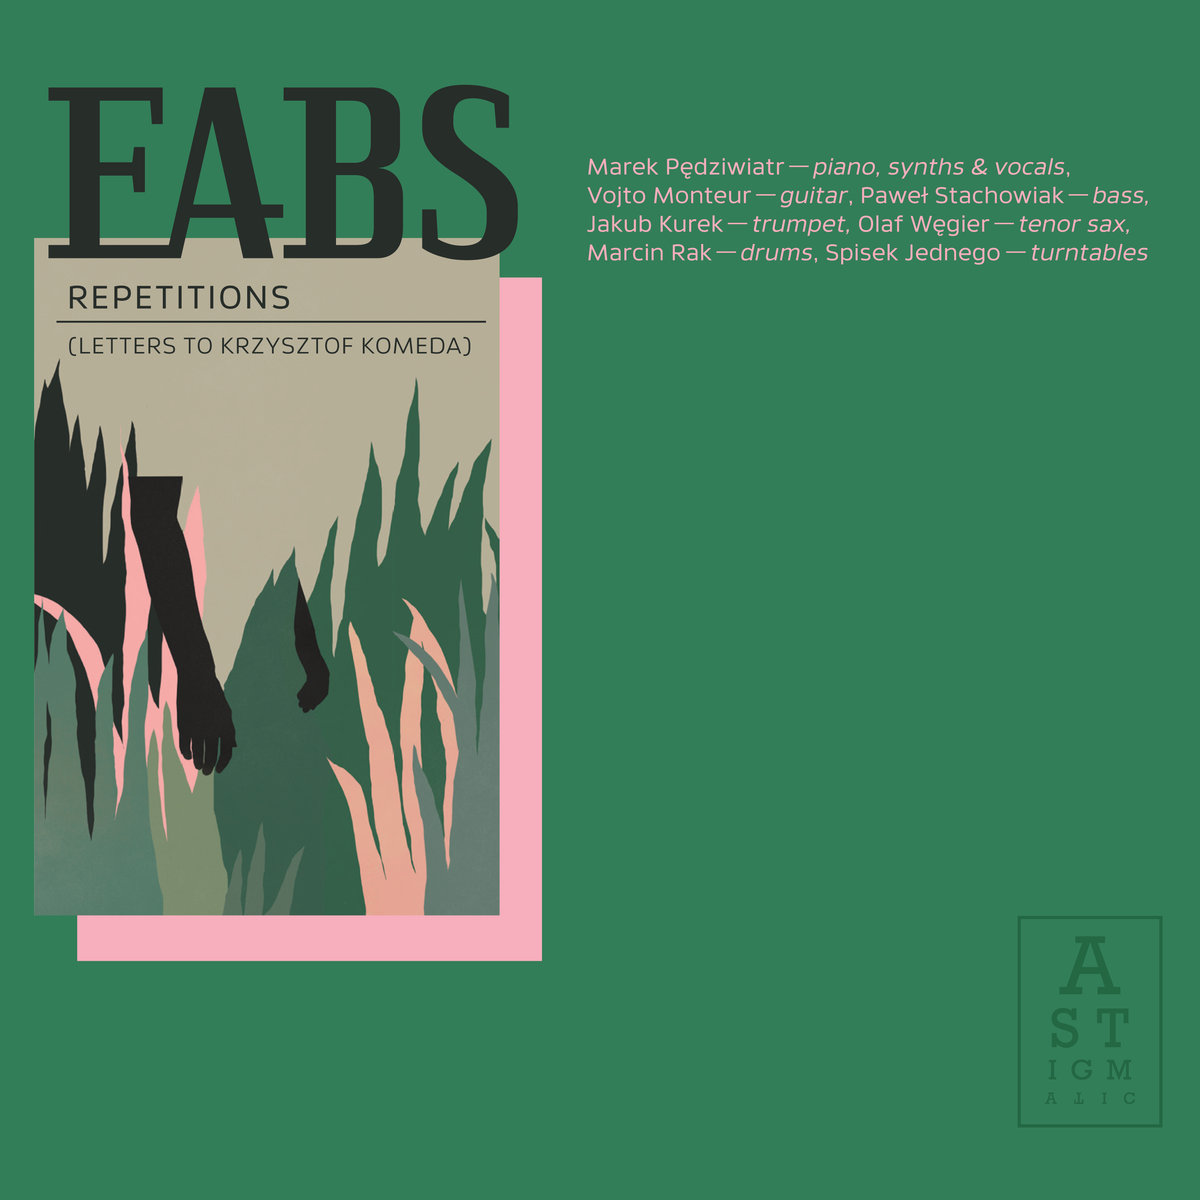 EABS - Repetitions (Letters to Krzysztof Komeda)